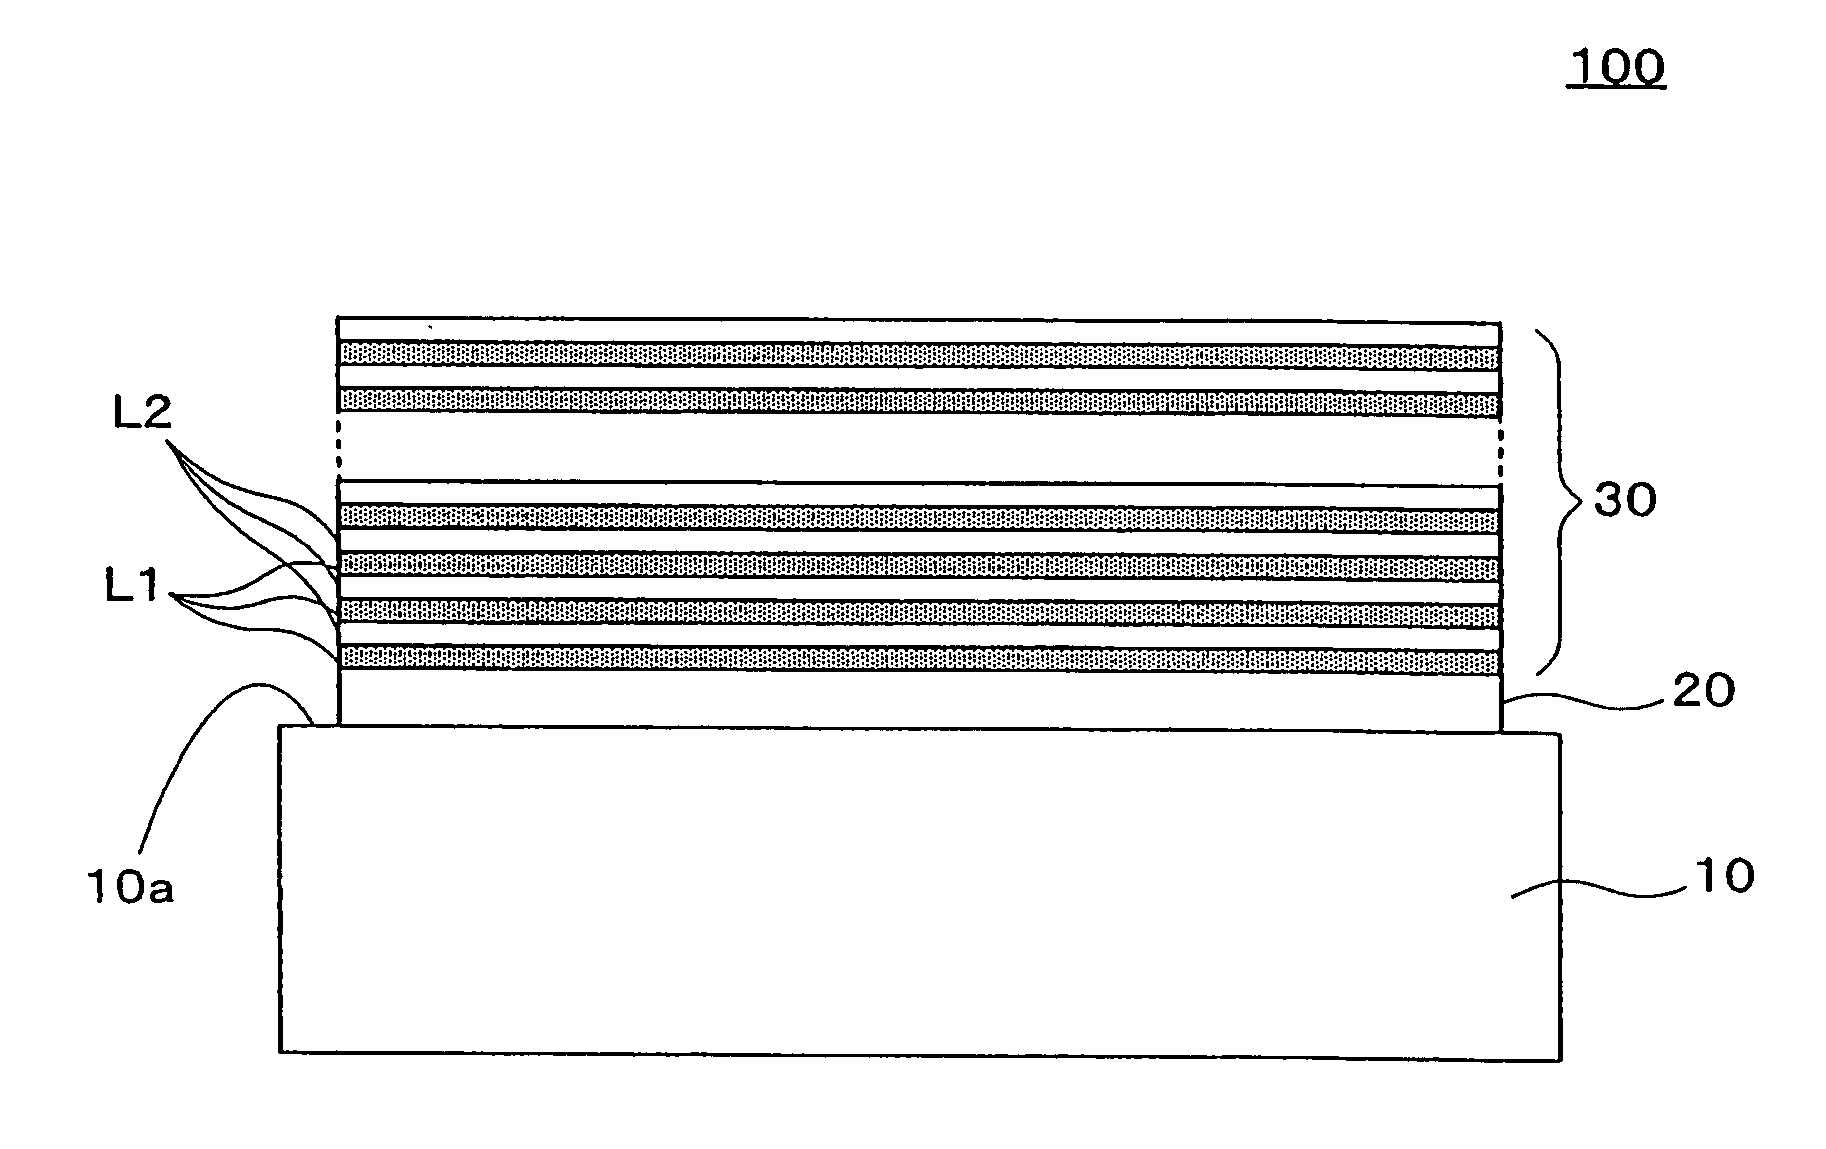 Optical element, exposure apparatus using the same, and device manufacturing method